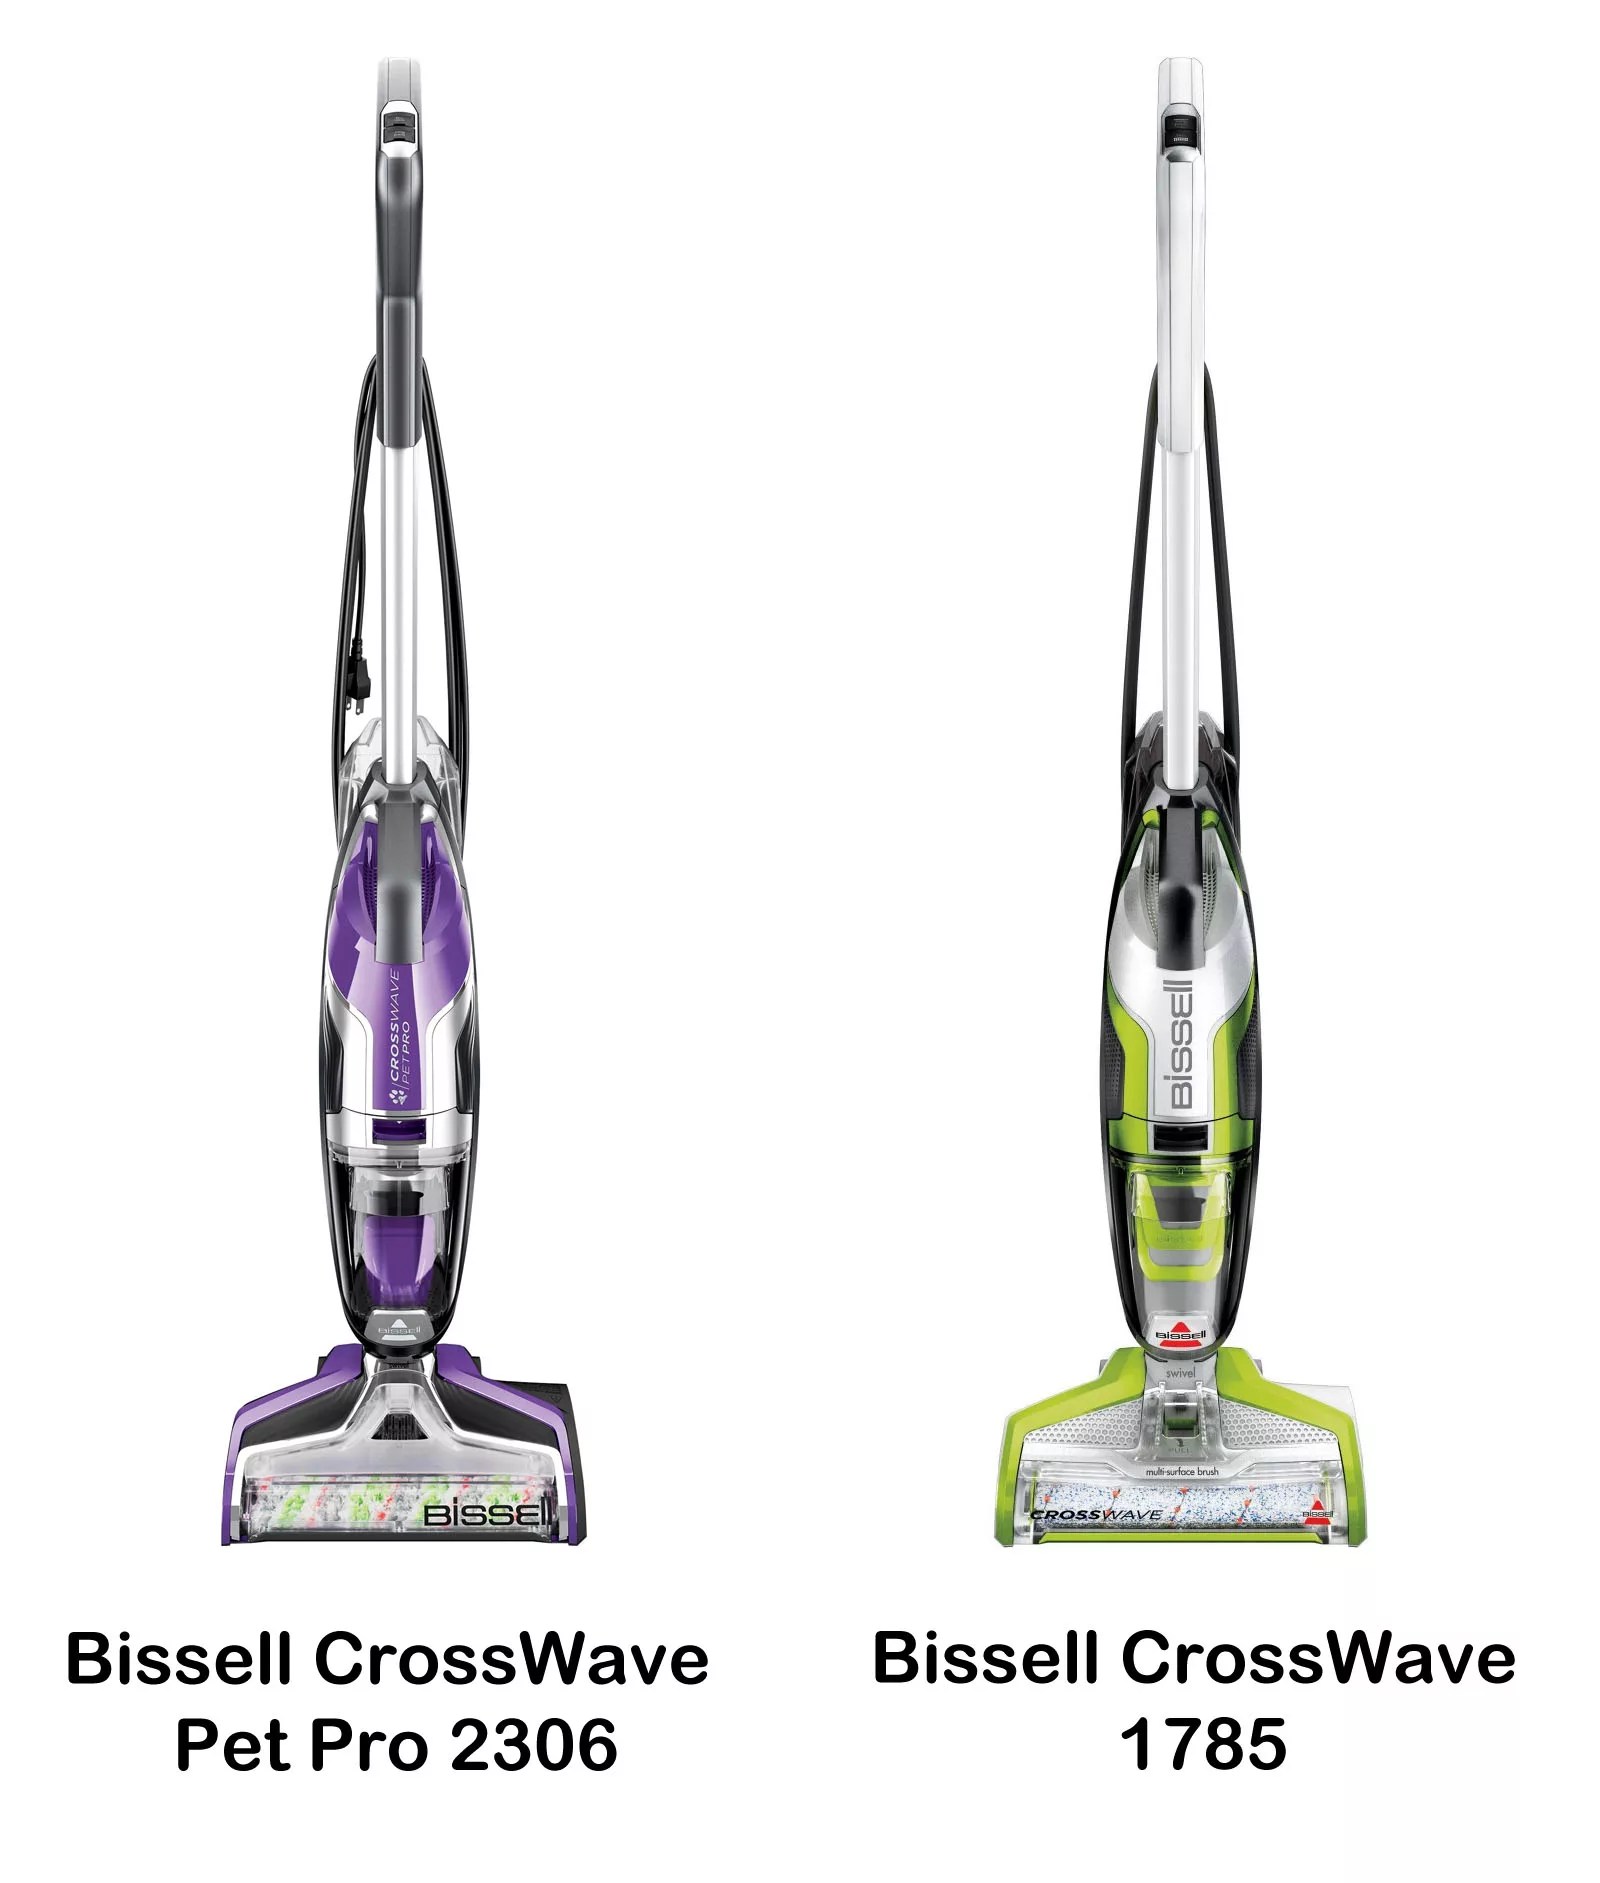 BISSELL CrossWave Pet Pro – an upgrade to a classic